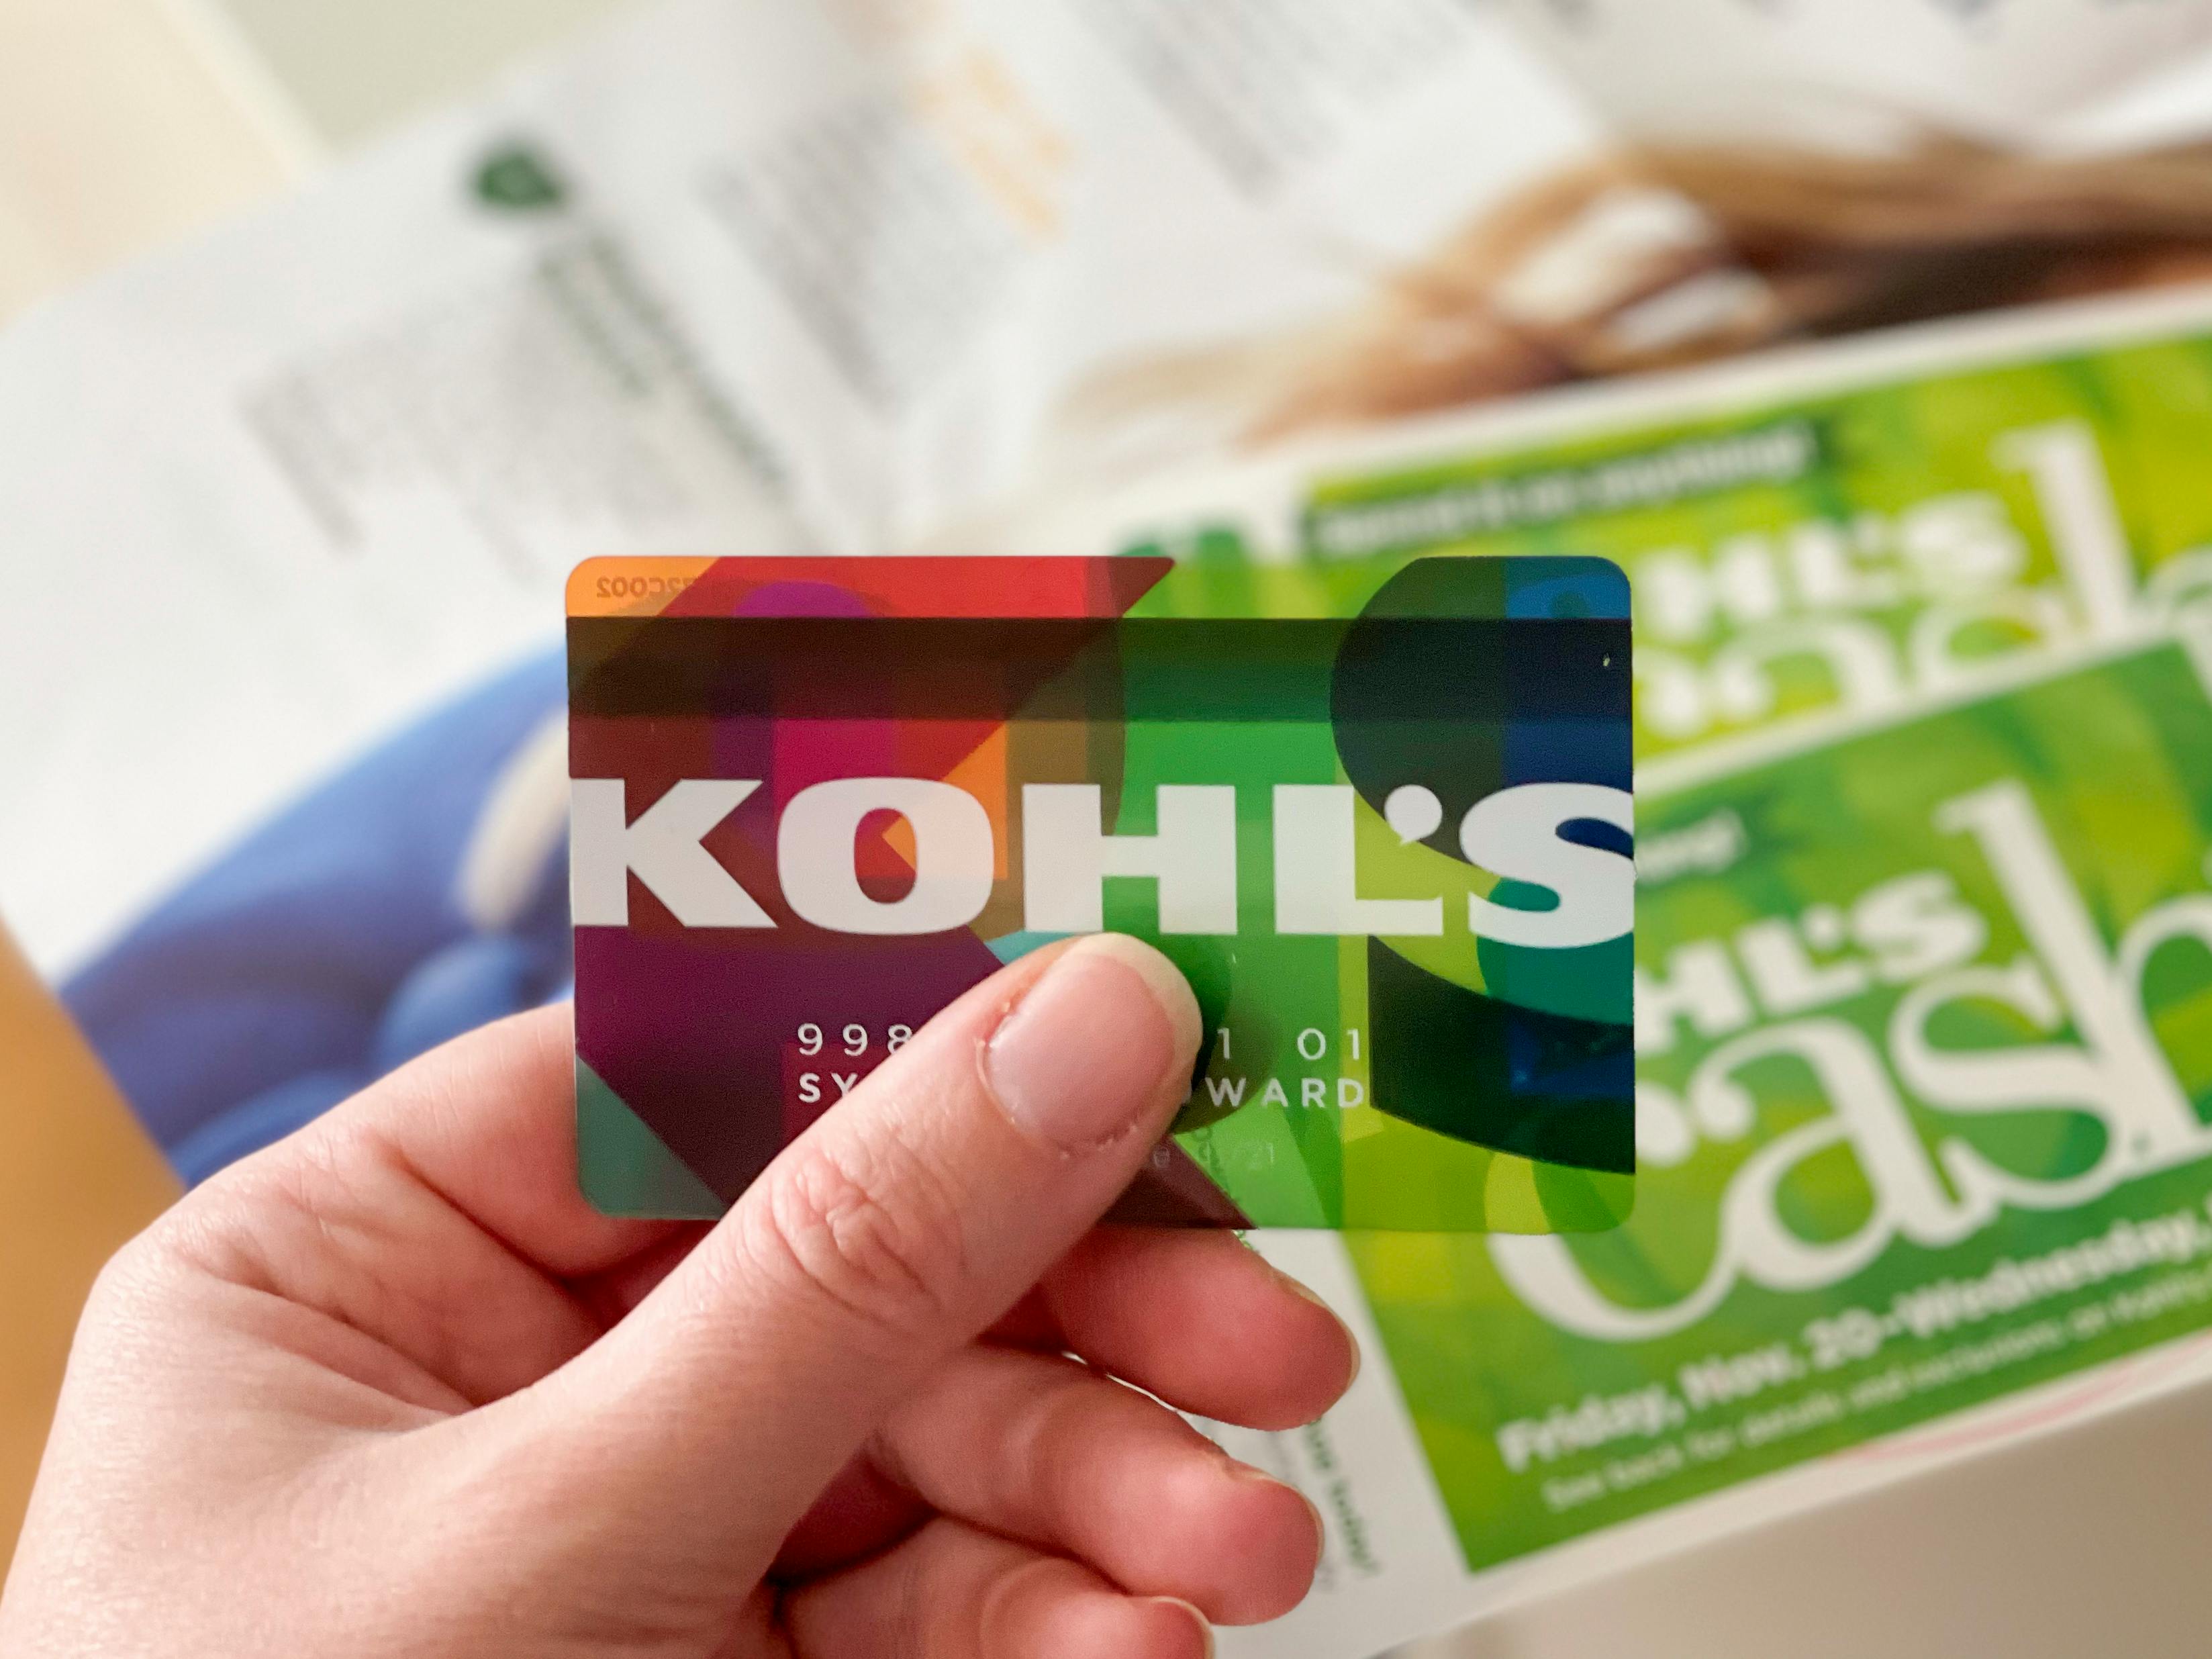 kohls-credit-card-payment-address-dawne-colwell